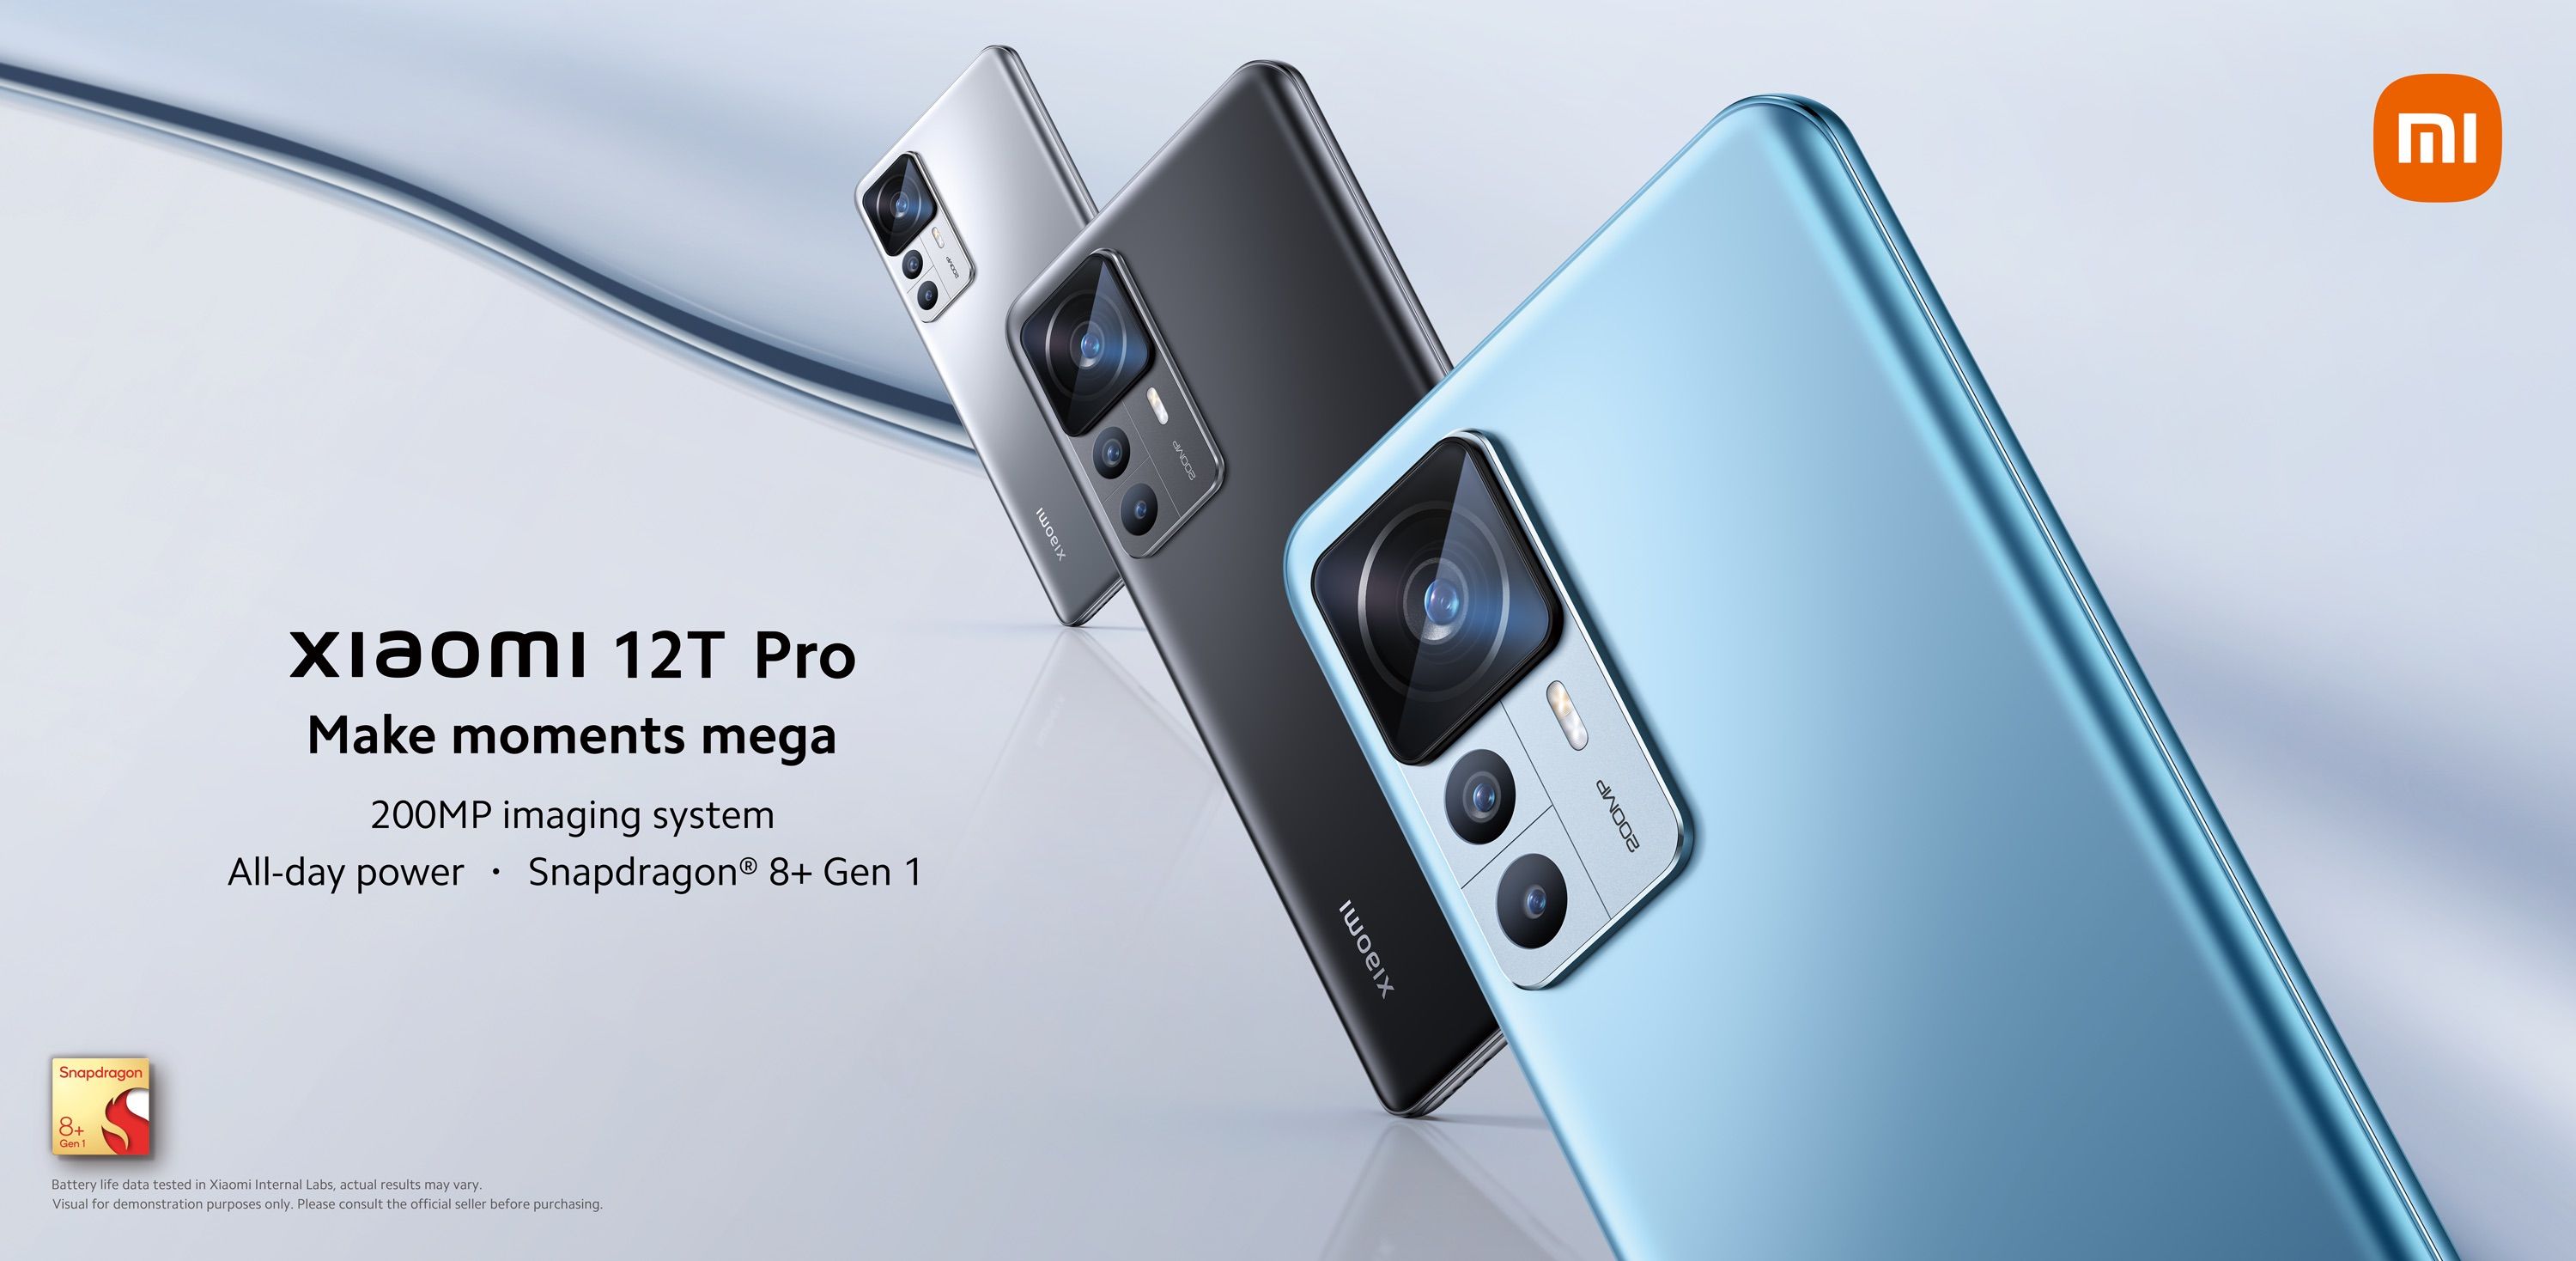 Xiaomi 12T Pro Review: A 200MP Camera Isn't the Only Standout Feature - CNET